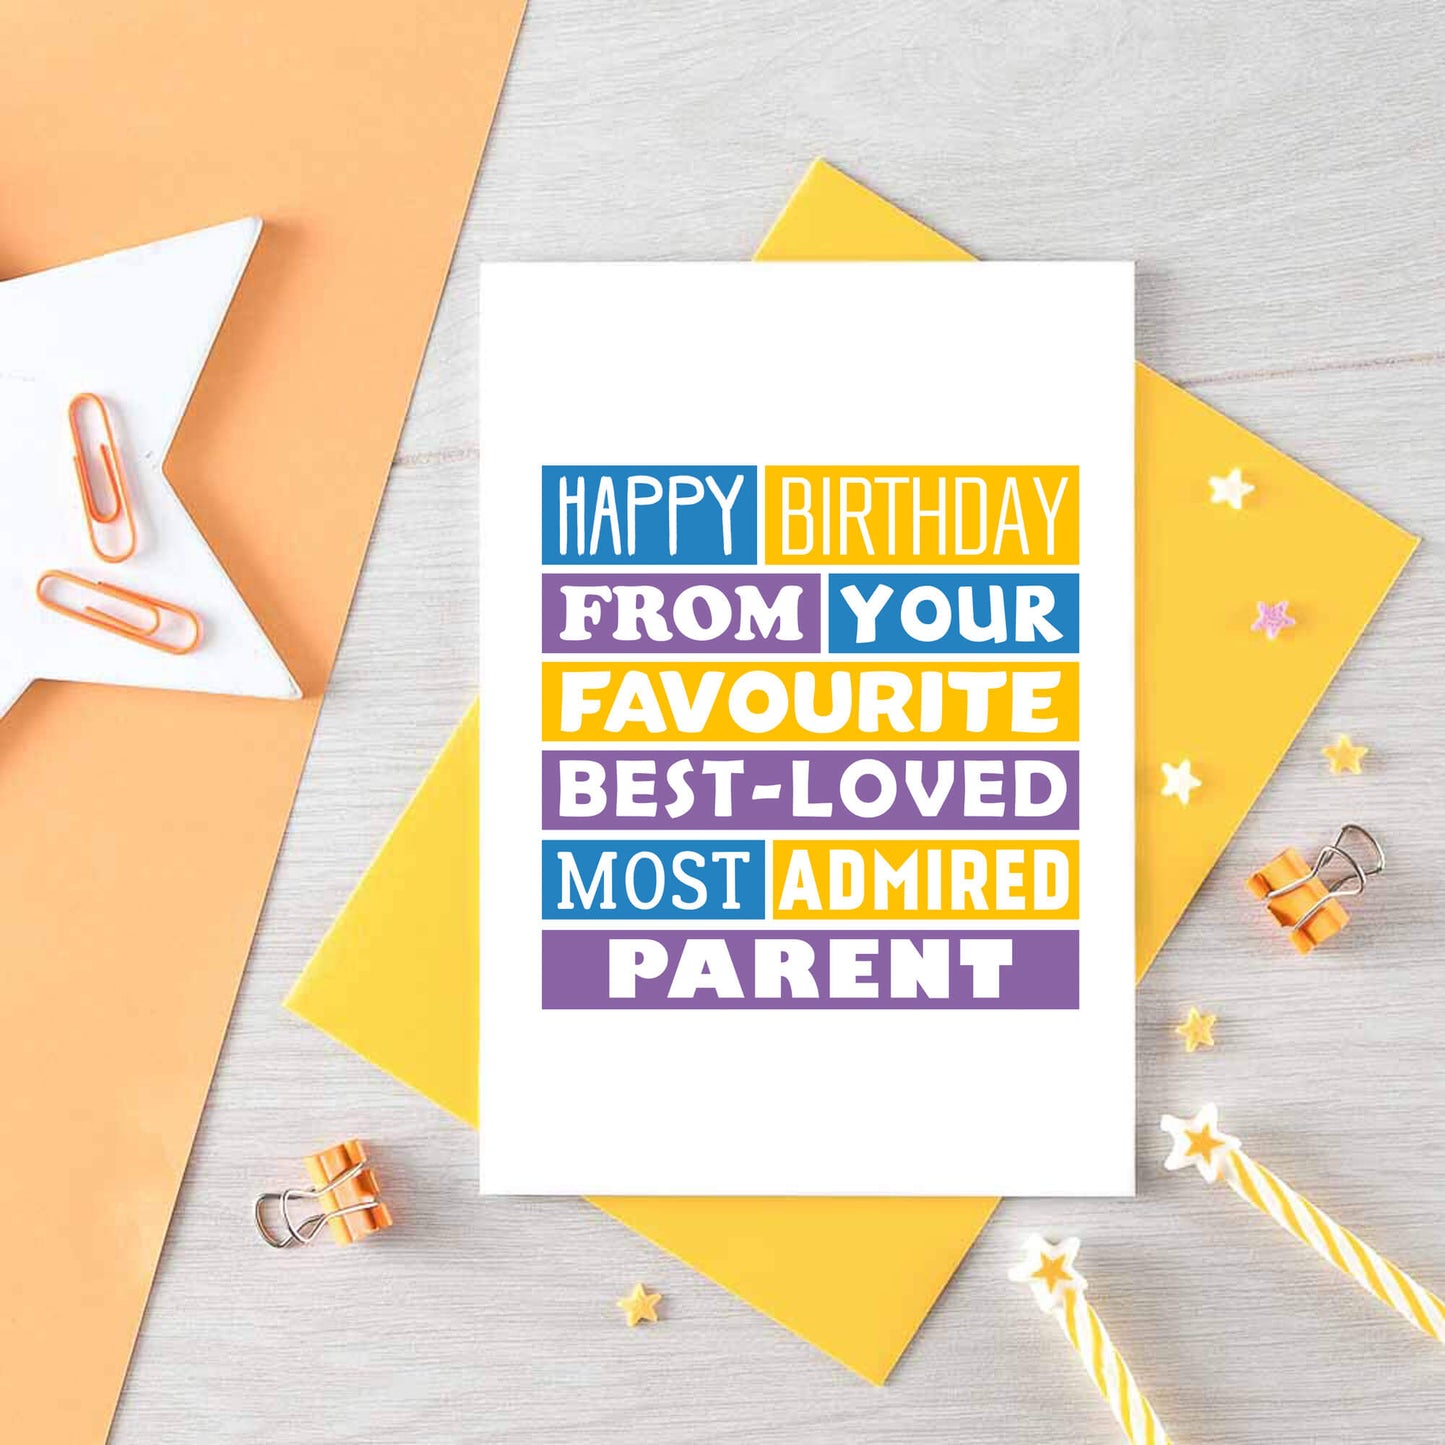 Son Birthday Card by SixElevenCreations. Reads Happy birthday from your favourite best-loved most admired parent. Product Code SE0194A6